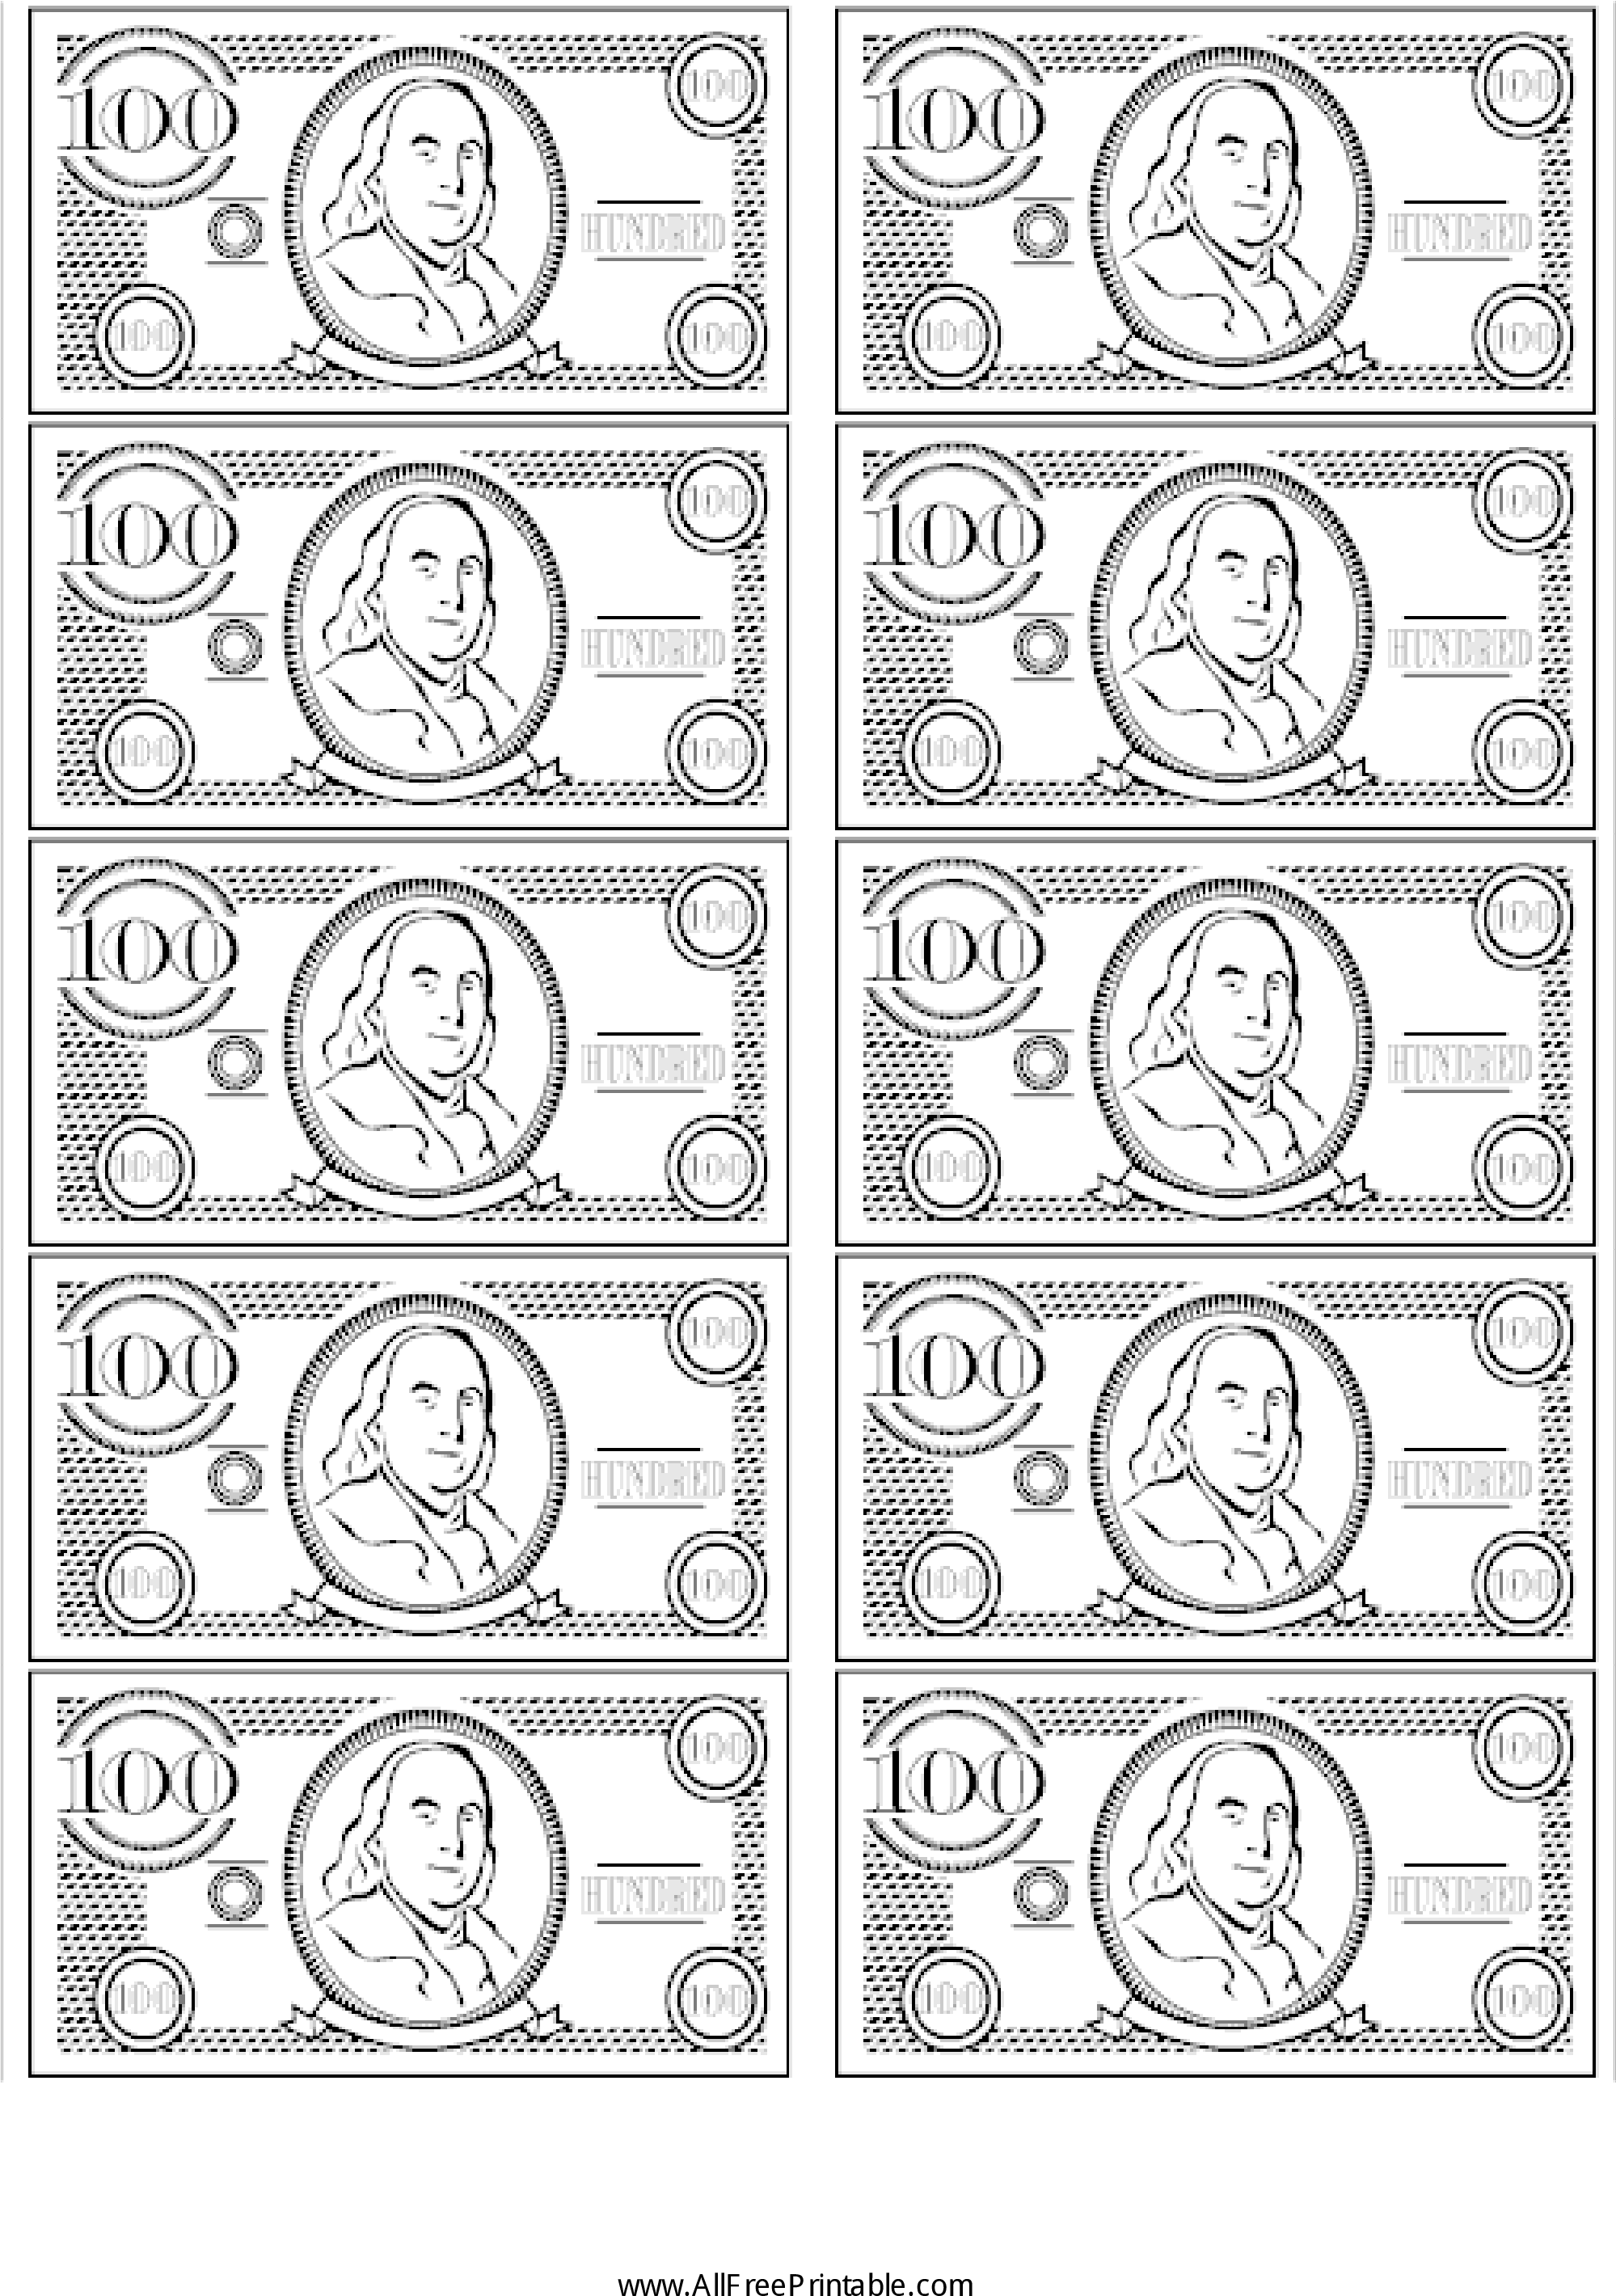 download 100 bill fake money main image printable play money black and white 1 png image with no background pngkey com